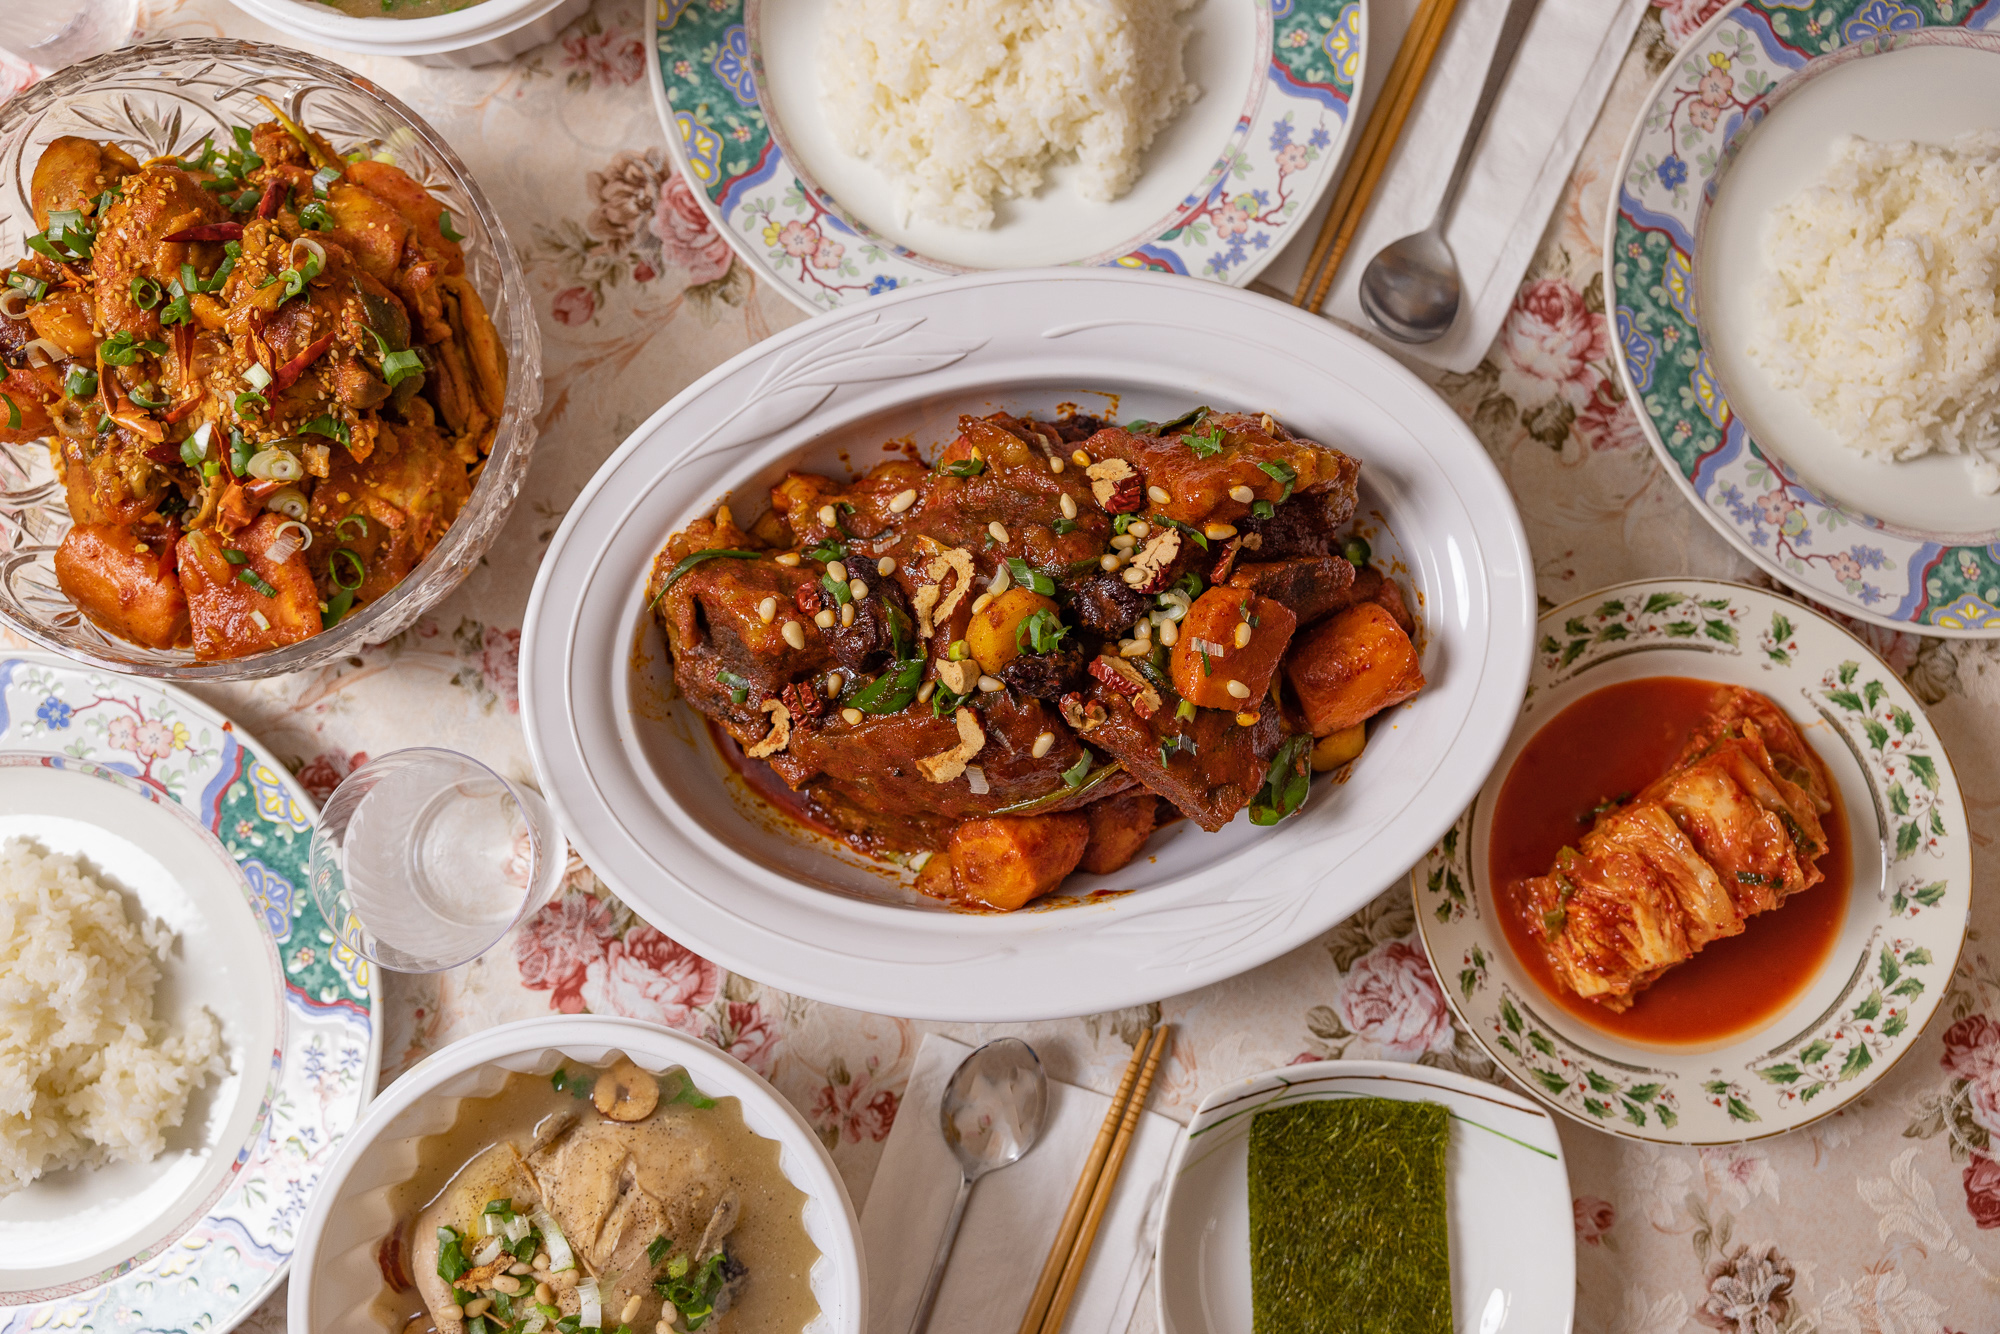 A group of plates and bowls on a flower tablecloth, with red stewed meats, a whole chicken in soup, rice, and kimchi.